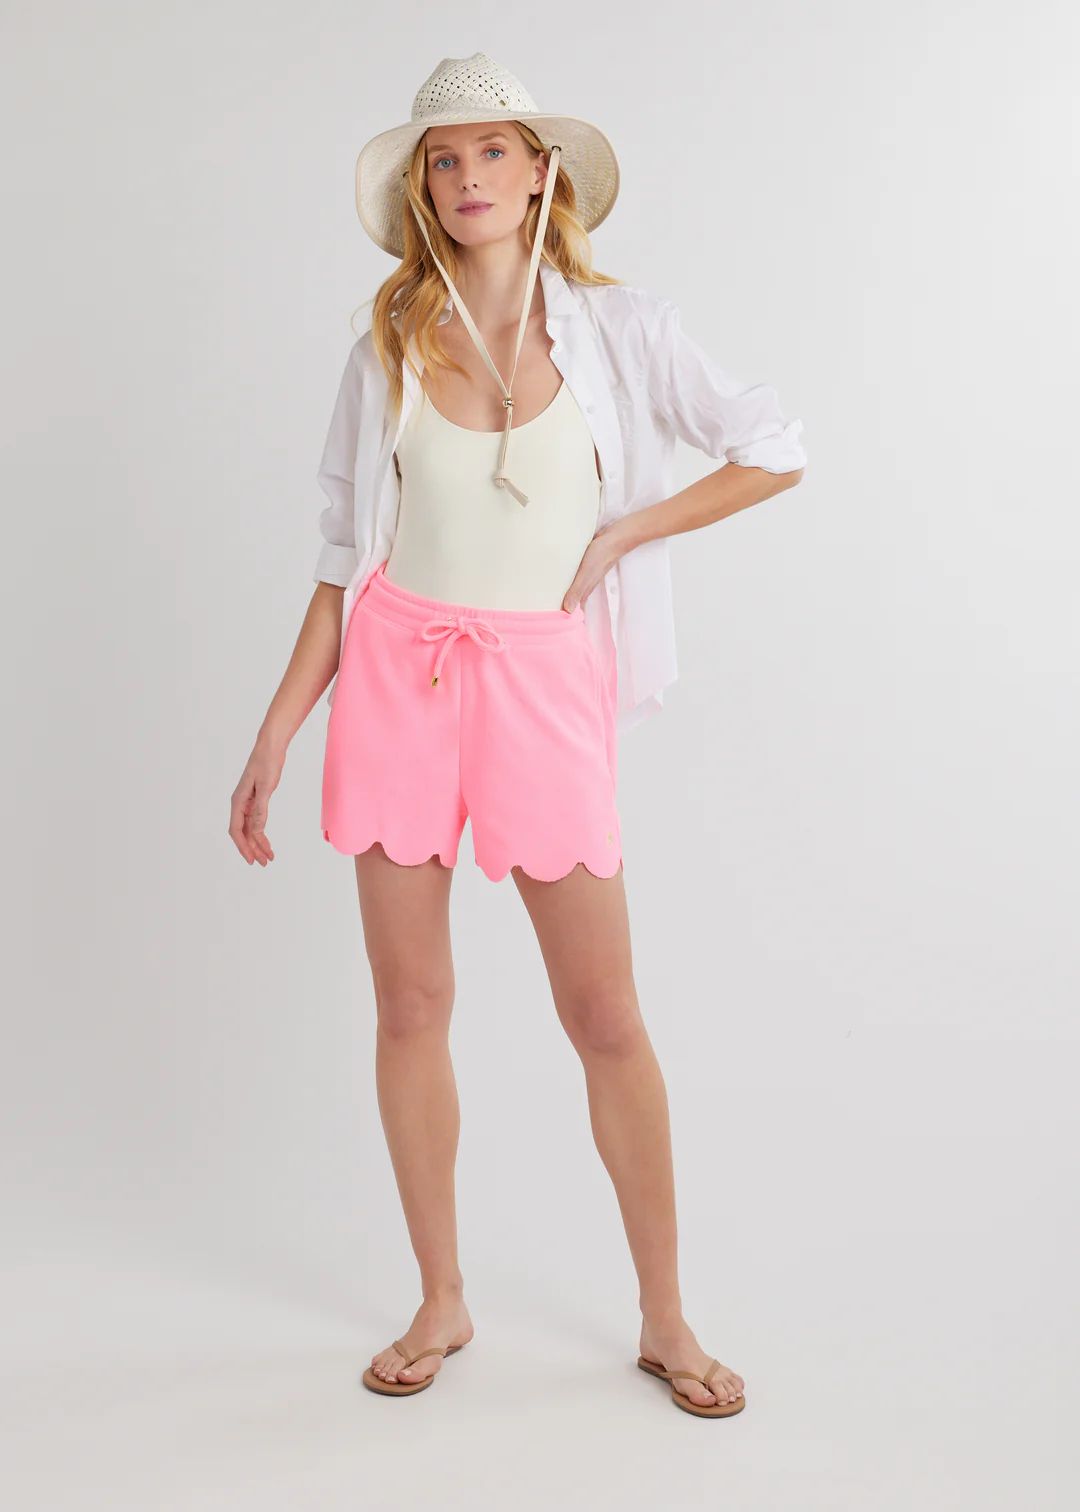 Starboard Short in Terry Fleece (Cotton Candy) | Dudley Stephens